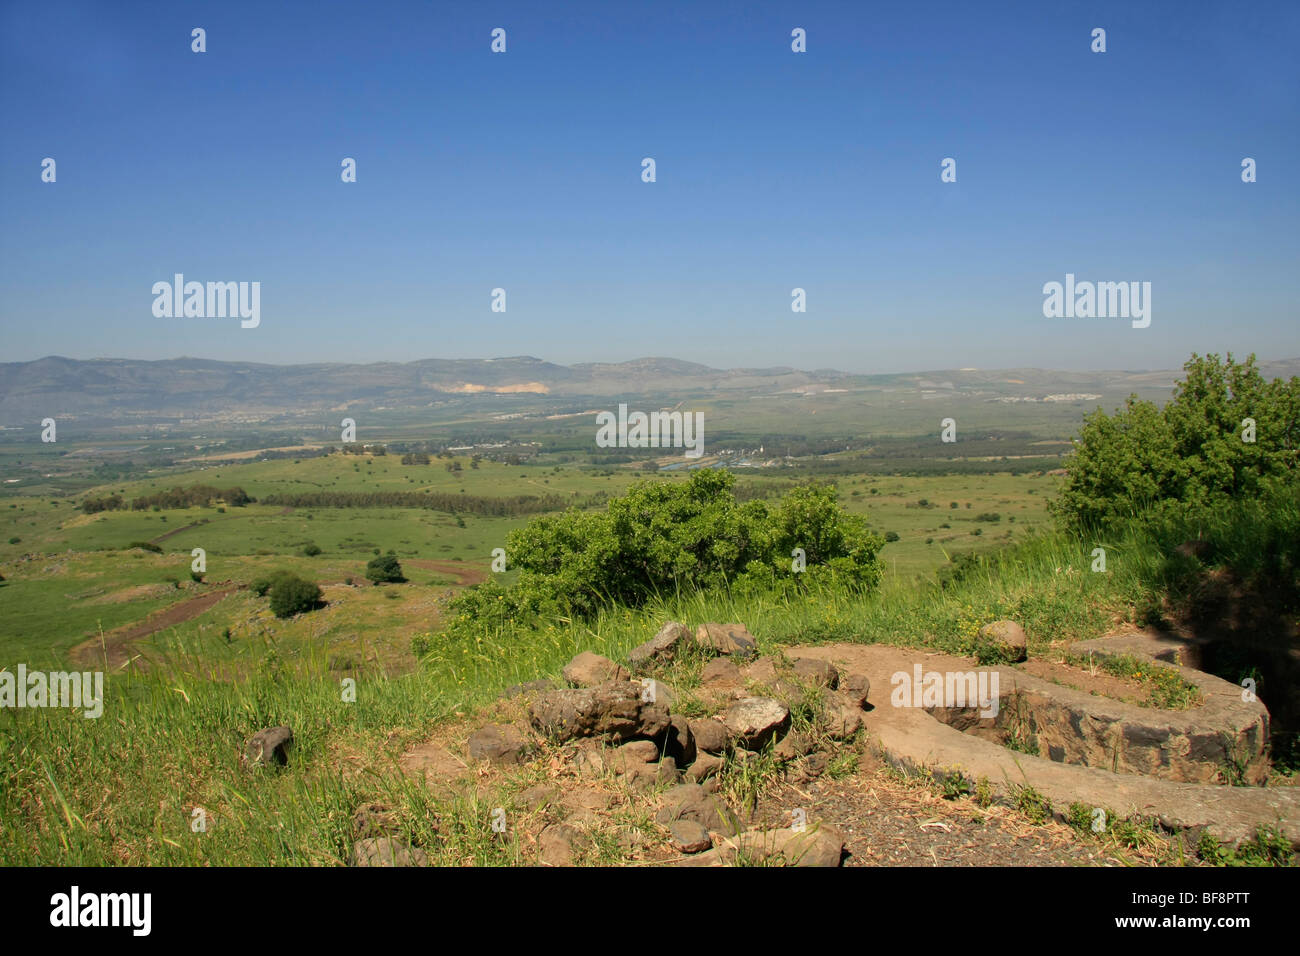 Golan Heights, Tel Faher is one of the Syrian fortifications that was captured by the Israel Defense Forces in the Six Day War Stock Photo